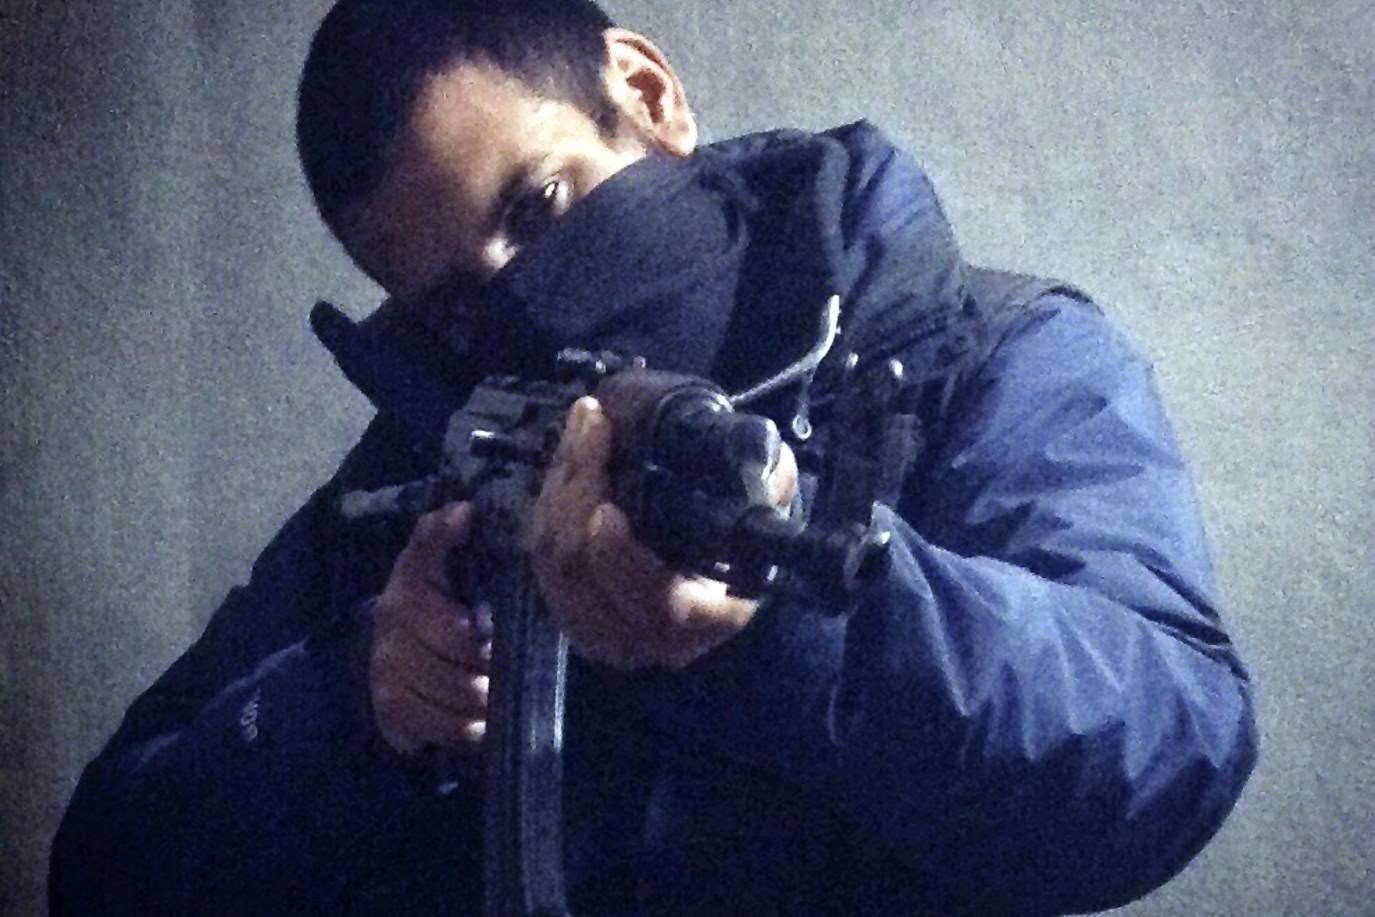 Computer hacker-turned jihadi Junaid Hussain pictured on Twitter with a rifle in his hands.